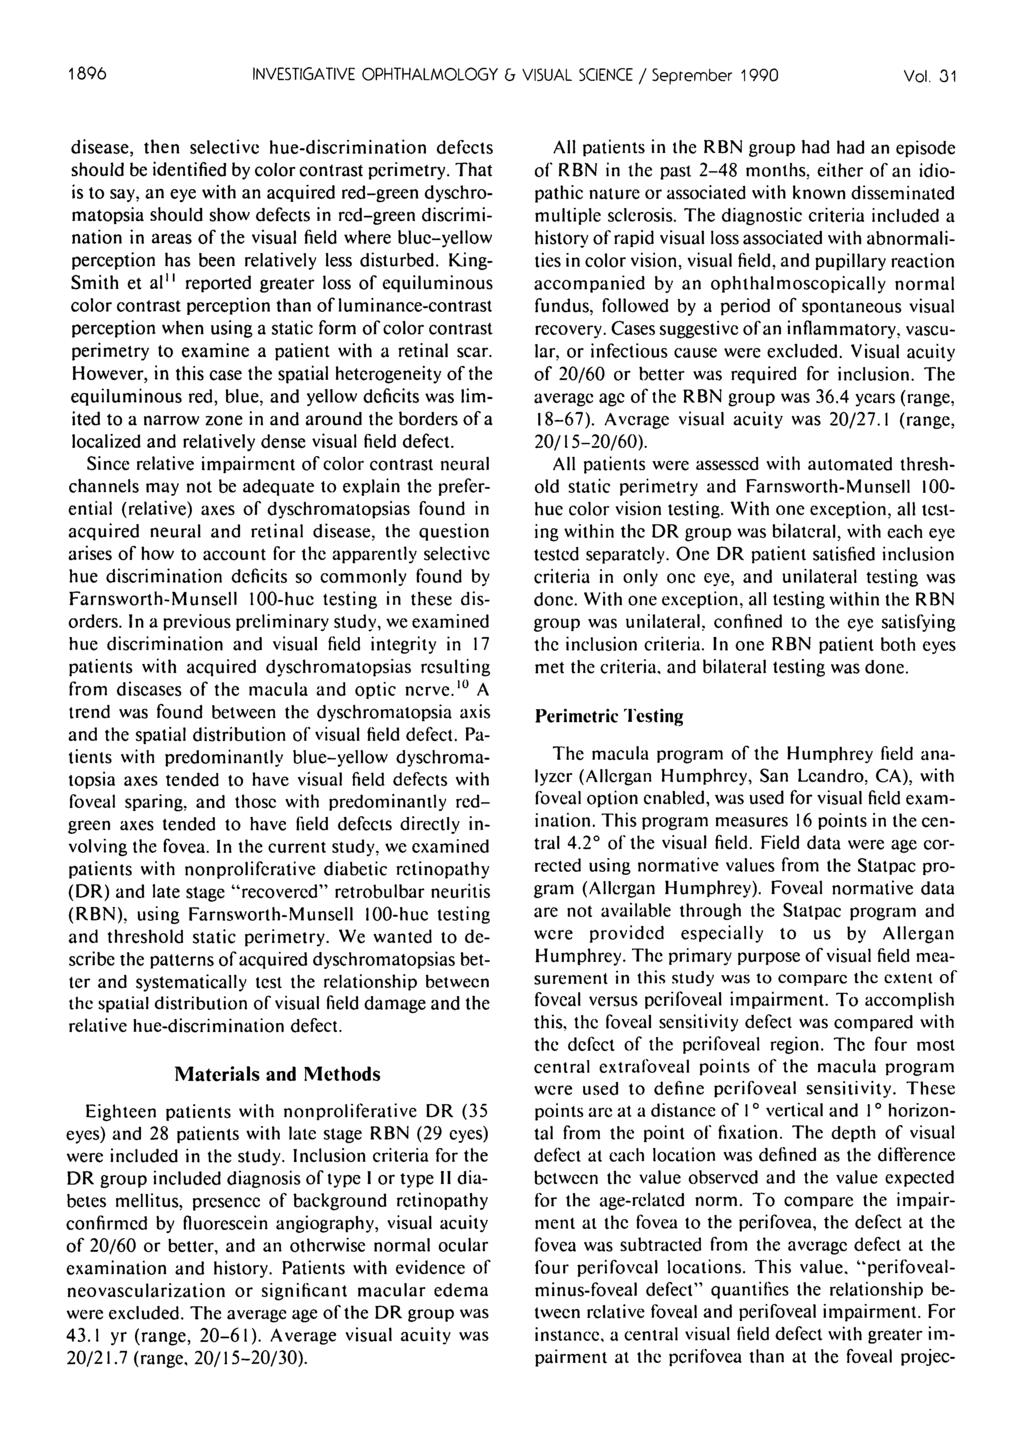 1896 INVESTIGATIVE OPHTHALMOLOGY b VISUAL SCIENCE / September 1990 Vol. 31 disease, then selective hue-discrimination defects should be identified by color contrast perimetry.